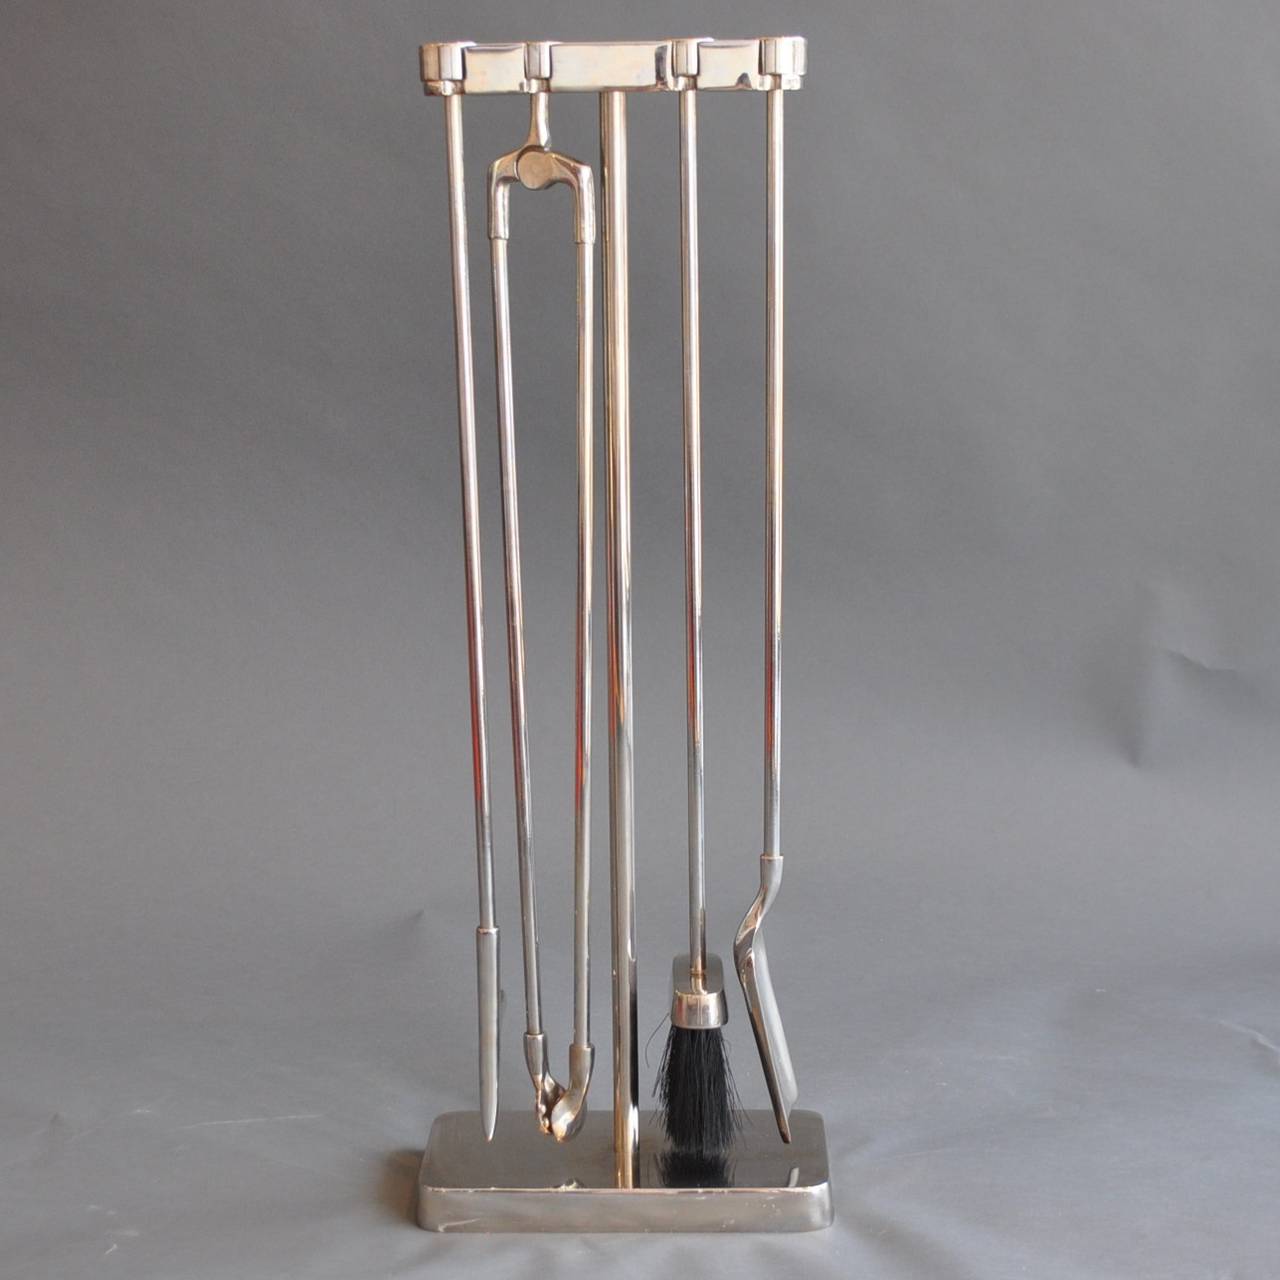 A vintage set of polished steel  fire tools on a 